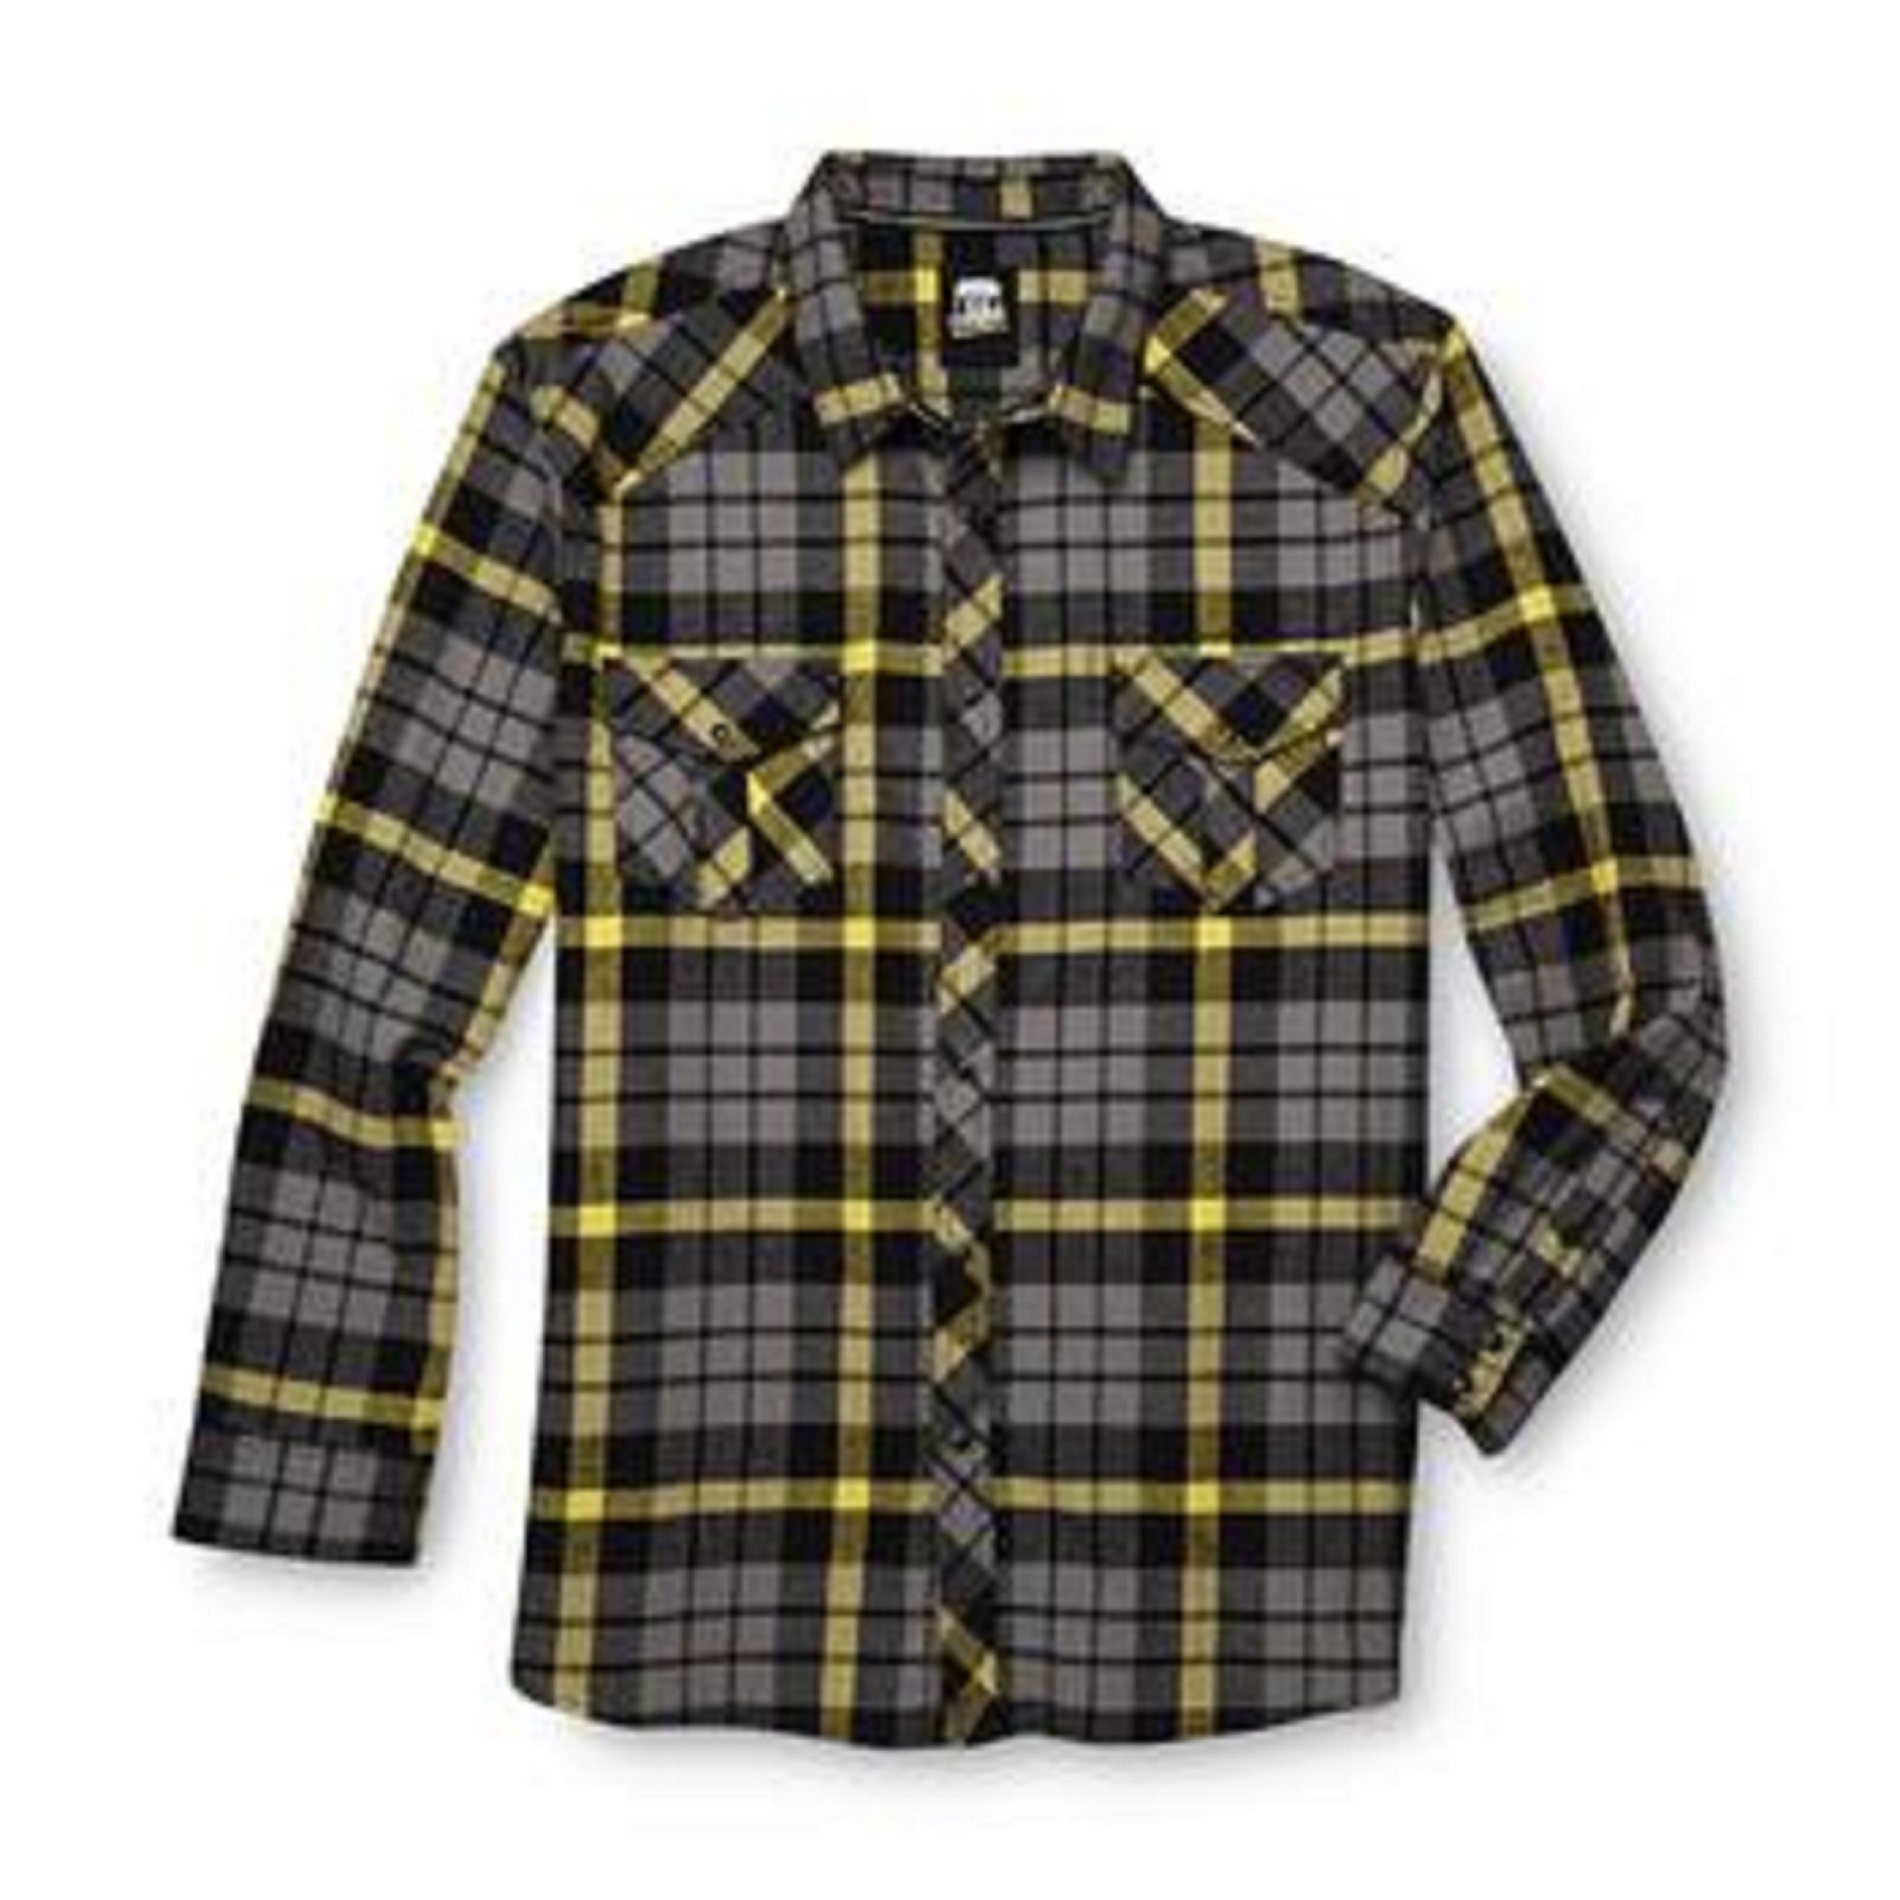 Route 66 Men's Big & Tall Snap-Front Flannel Shirt - Plaid